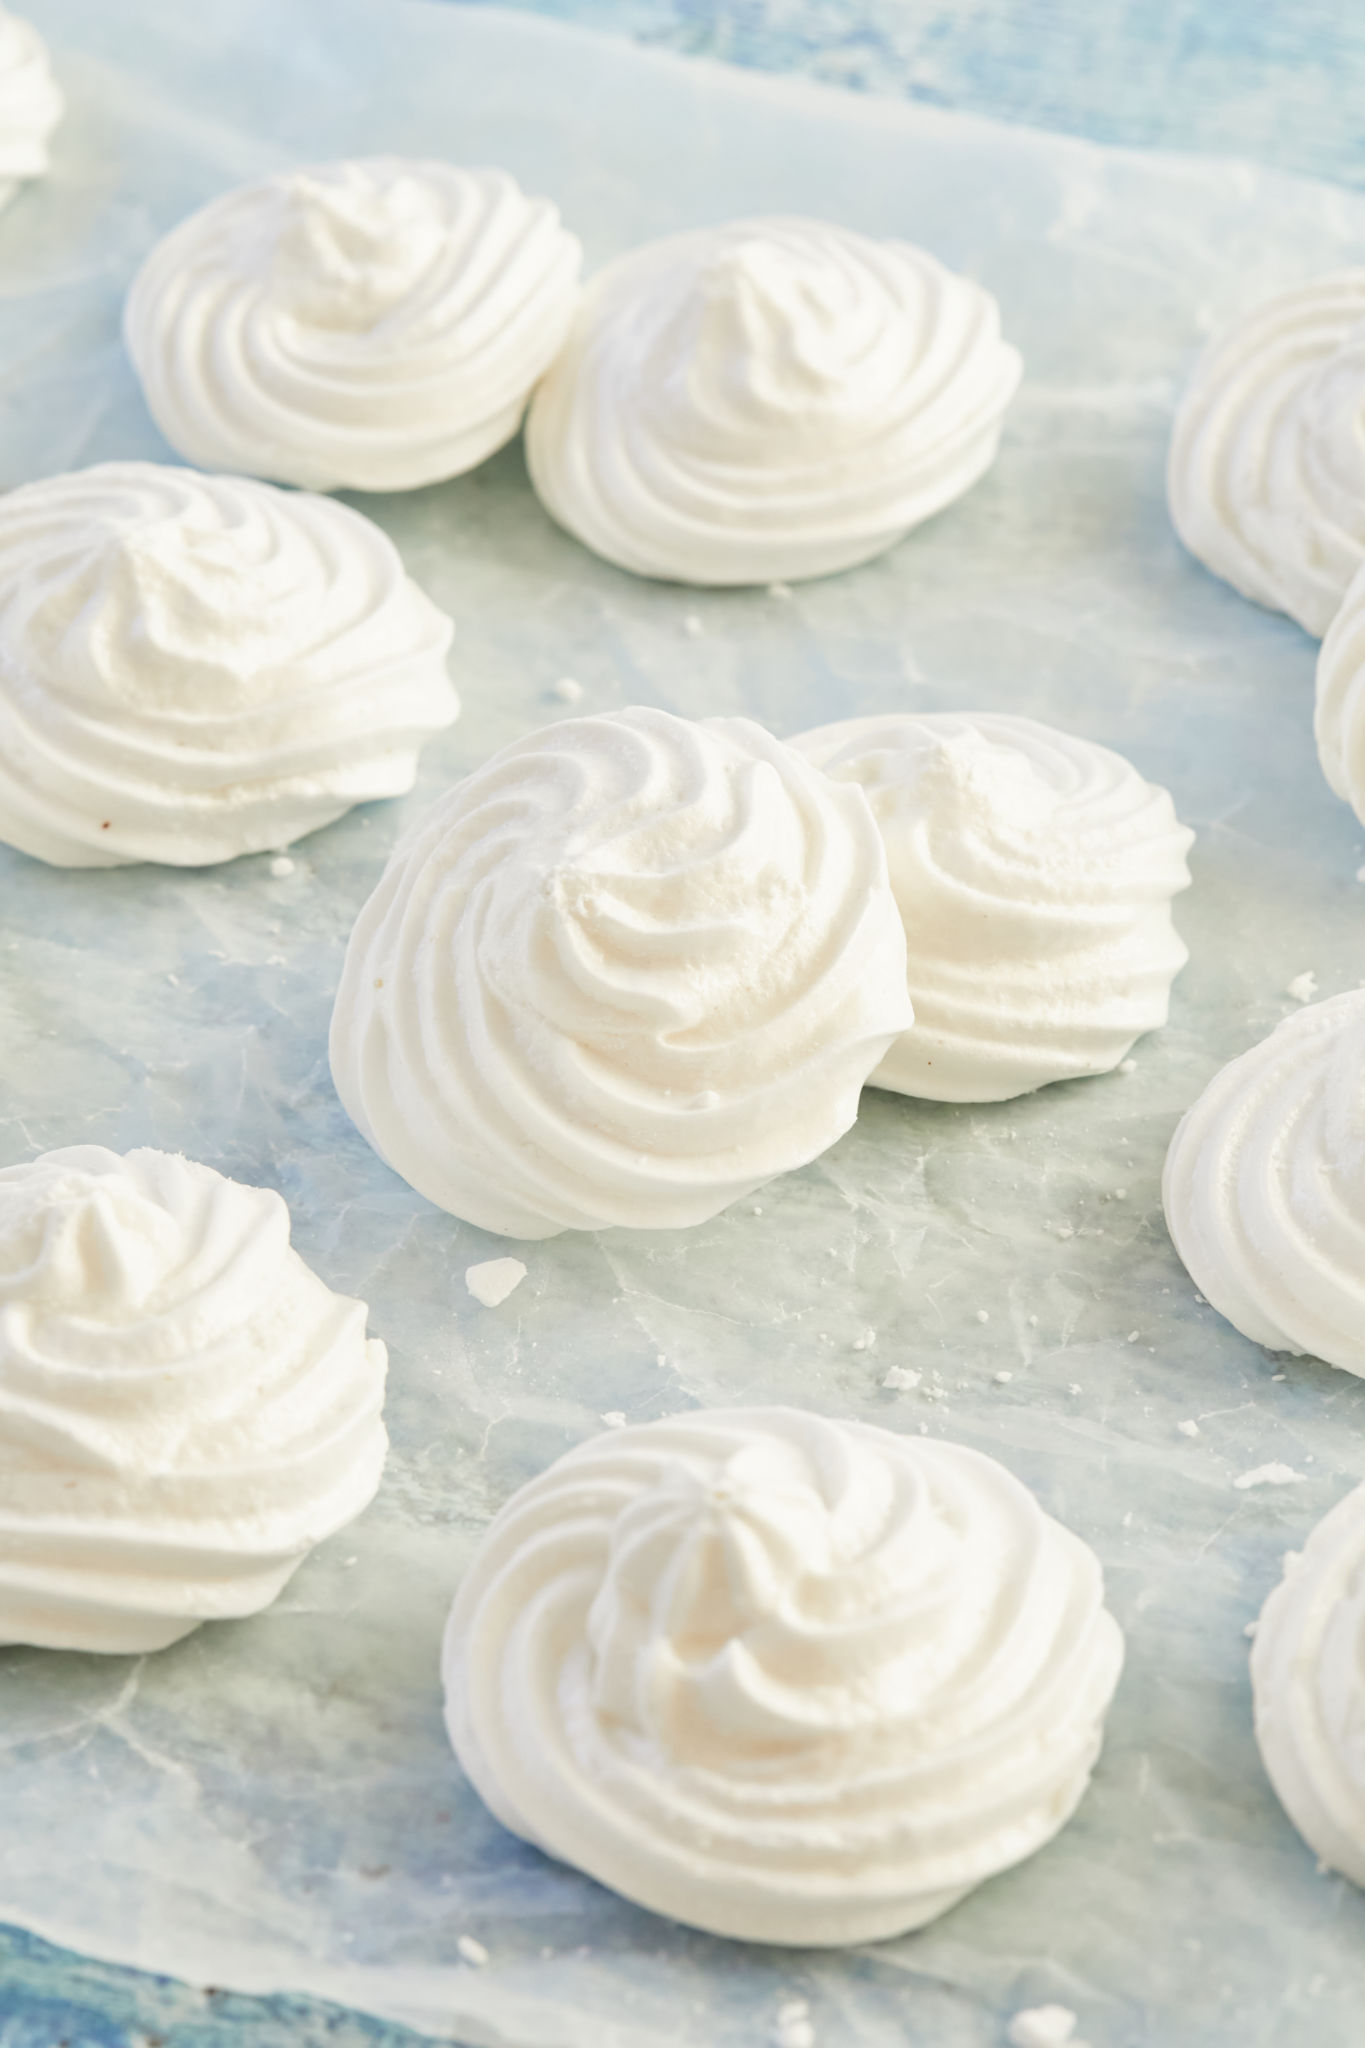 A handful of small vegan meringues placed on parchment.